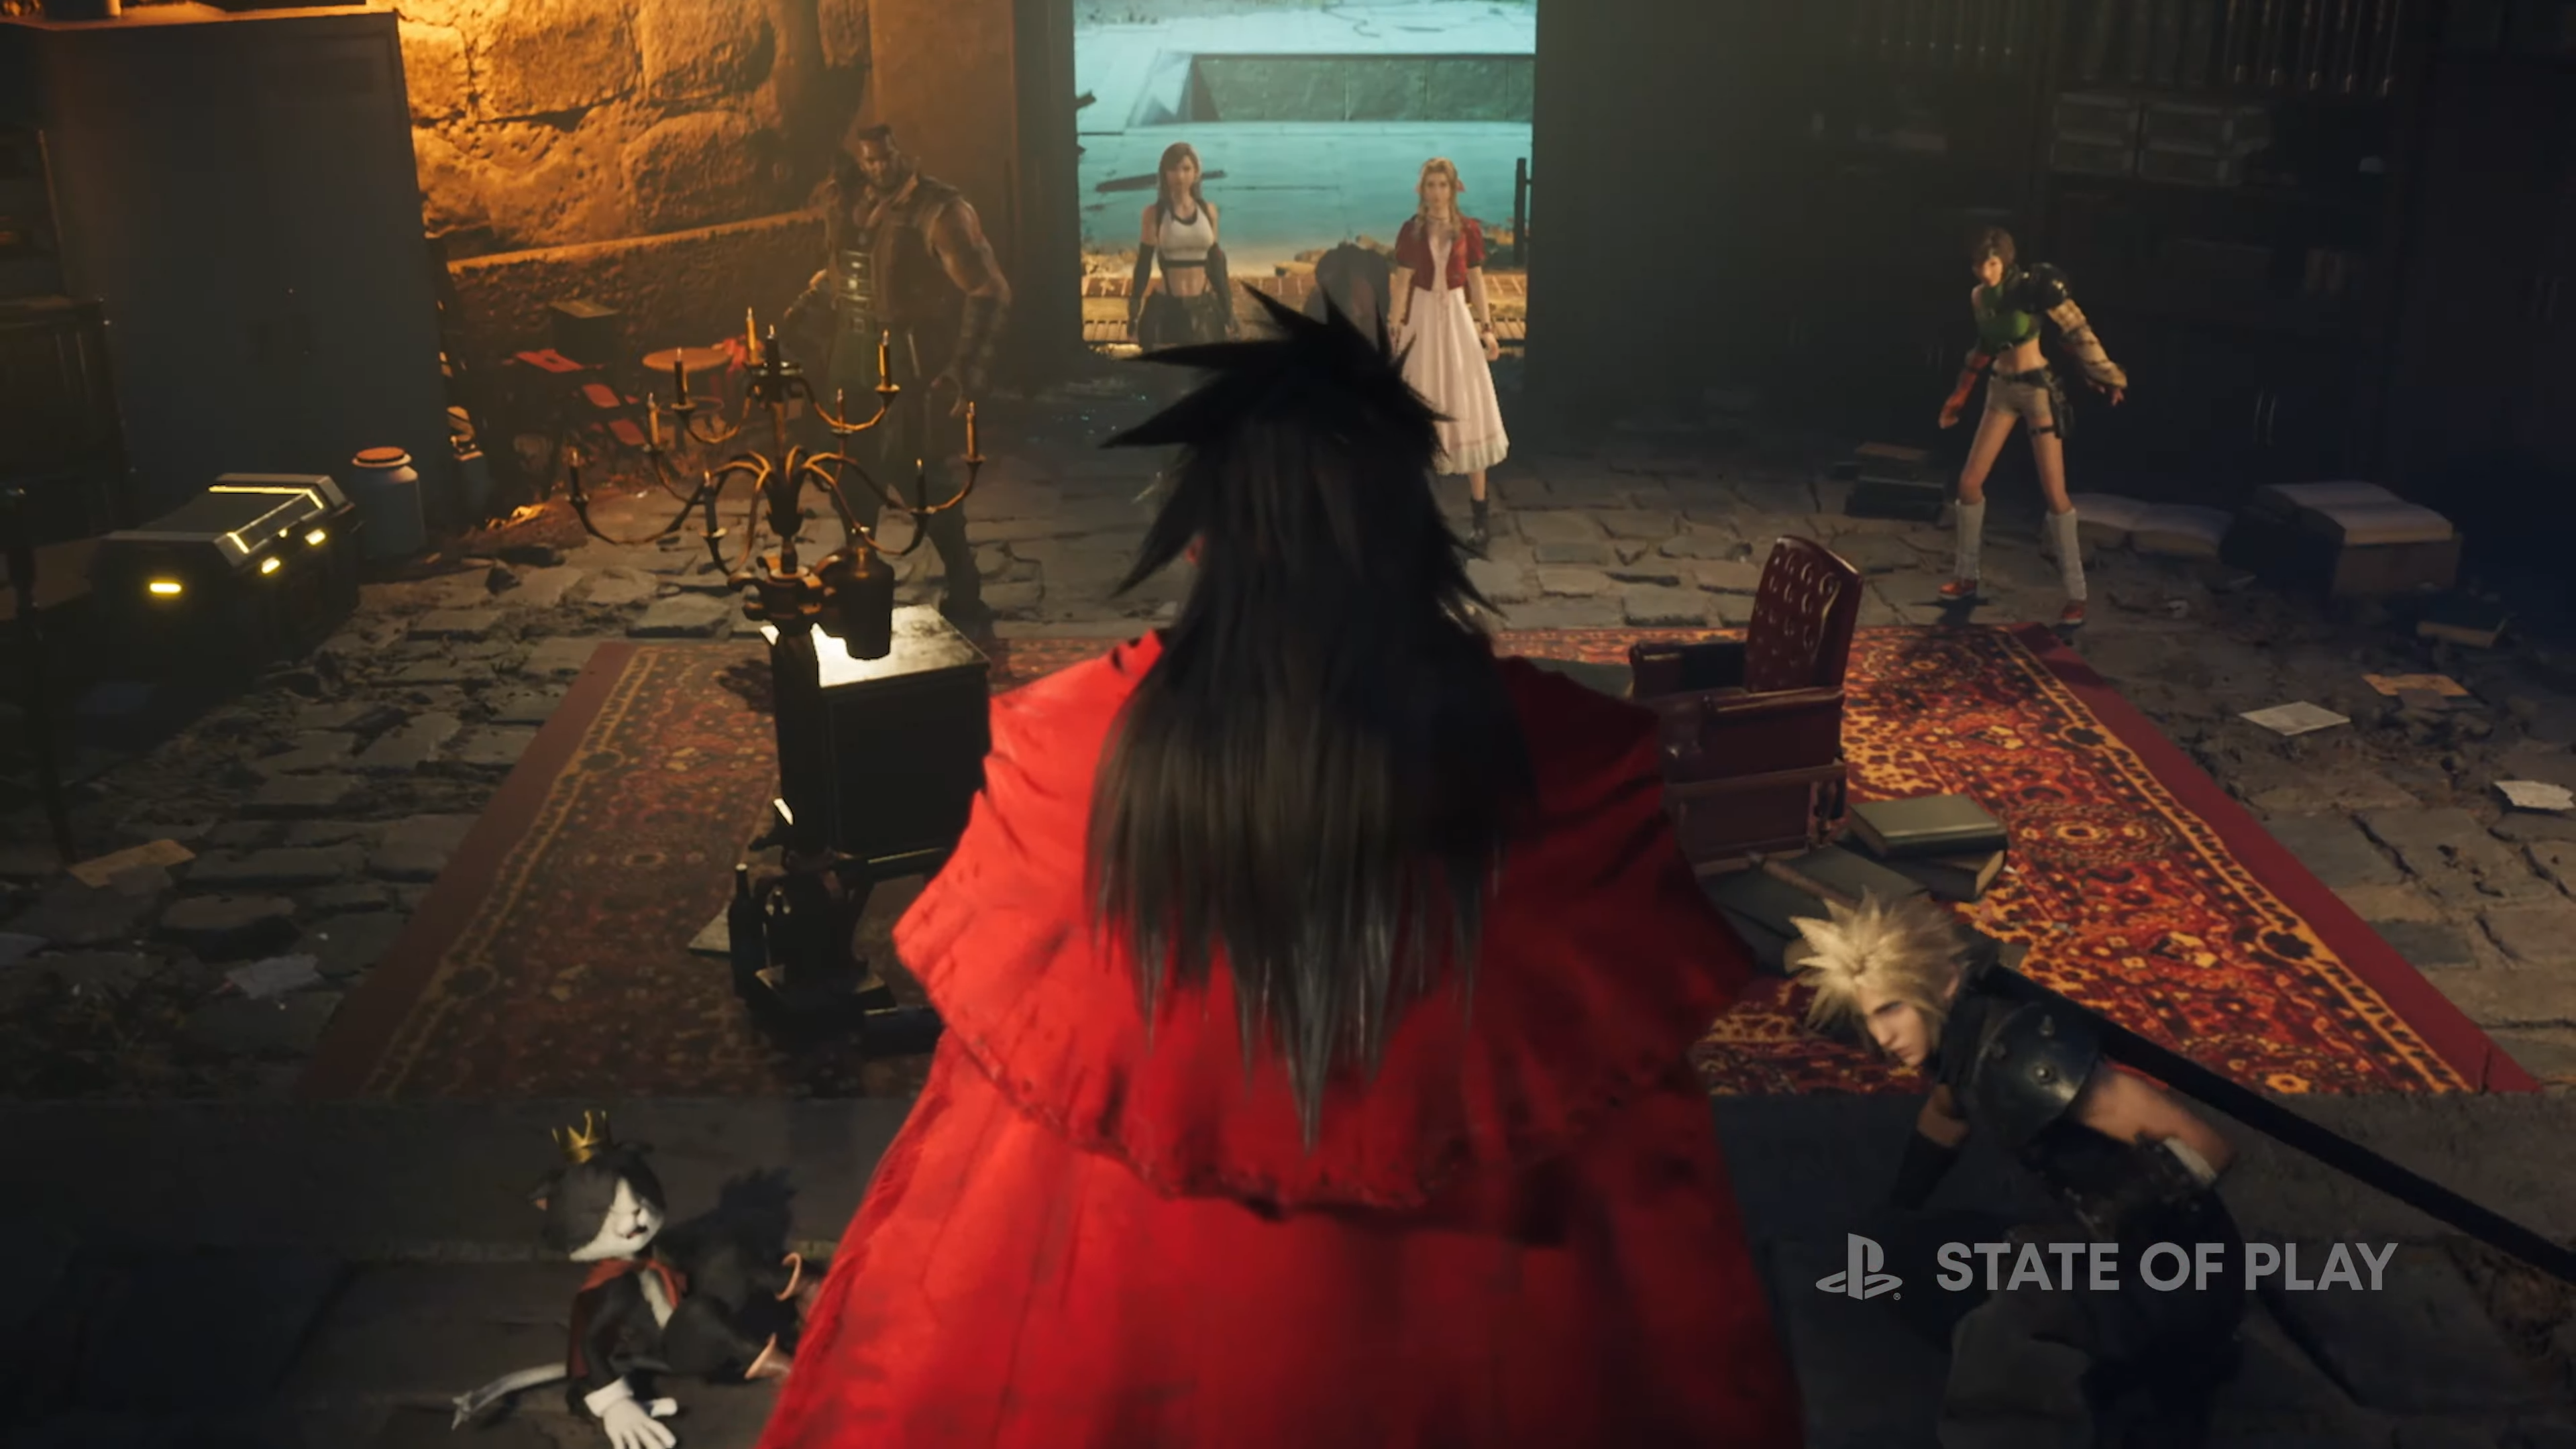 What is release date for Final Fantasy 7 Rebirth?